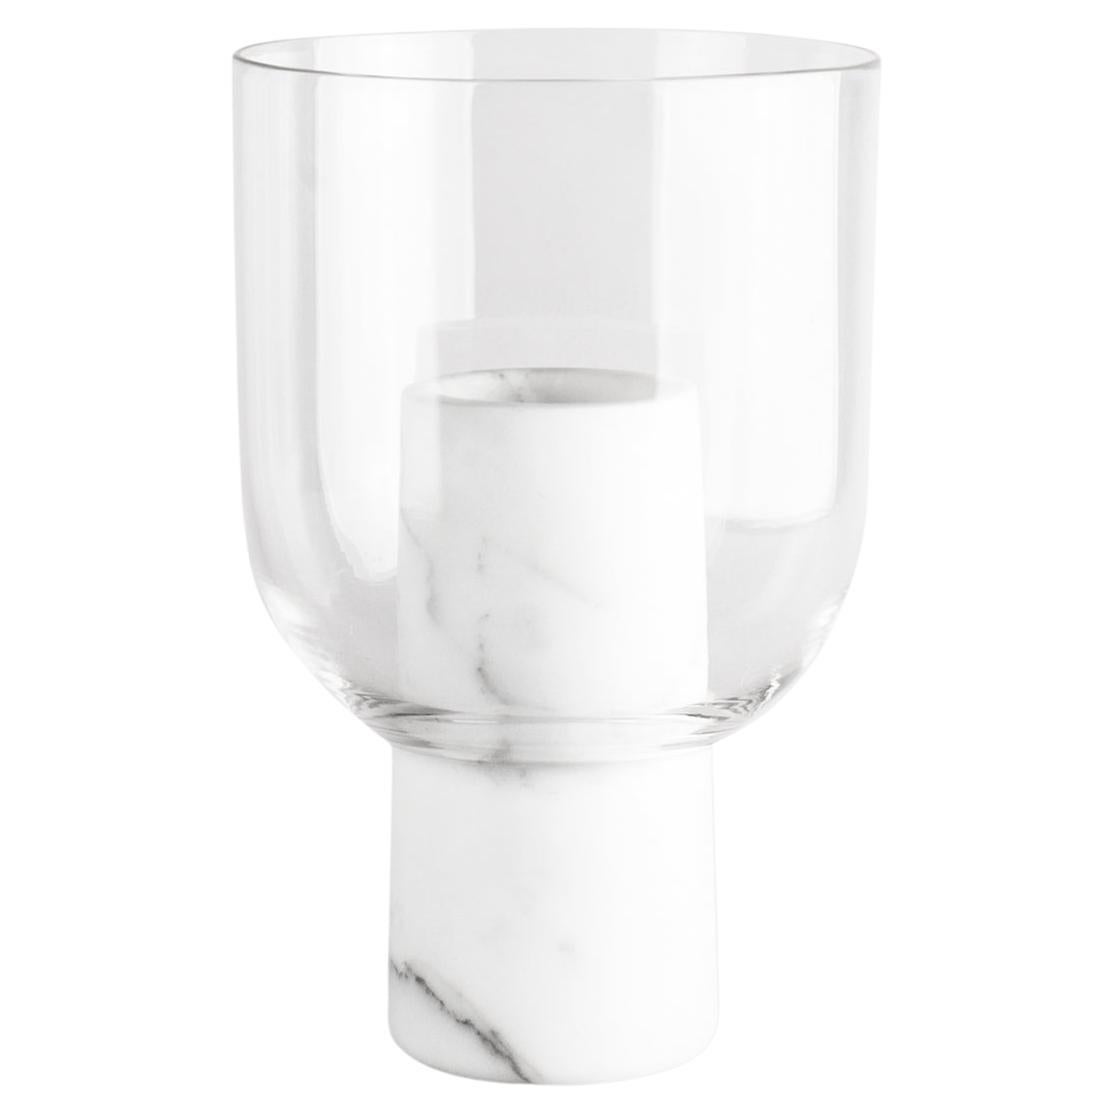 Statuario Marble and Hand Blown Glass, "Abito" Vase by Sandro Lopez White, Italy